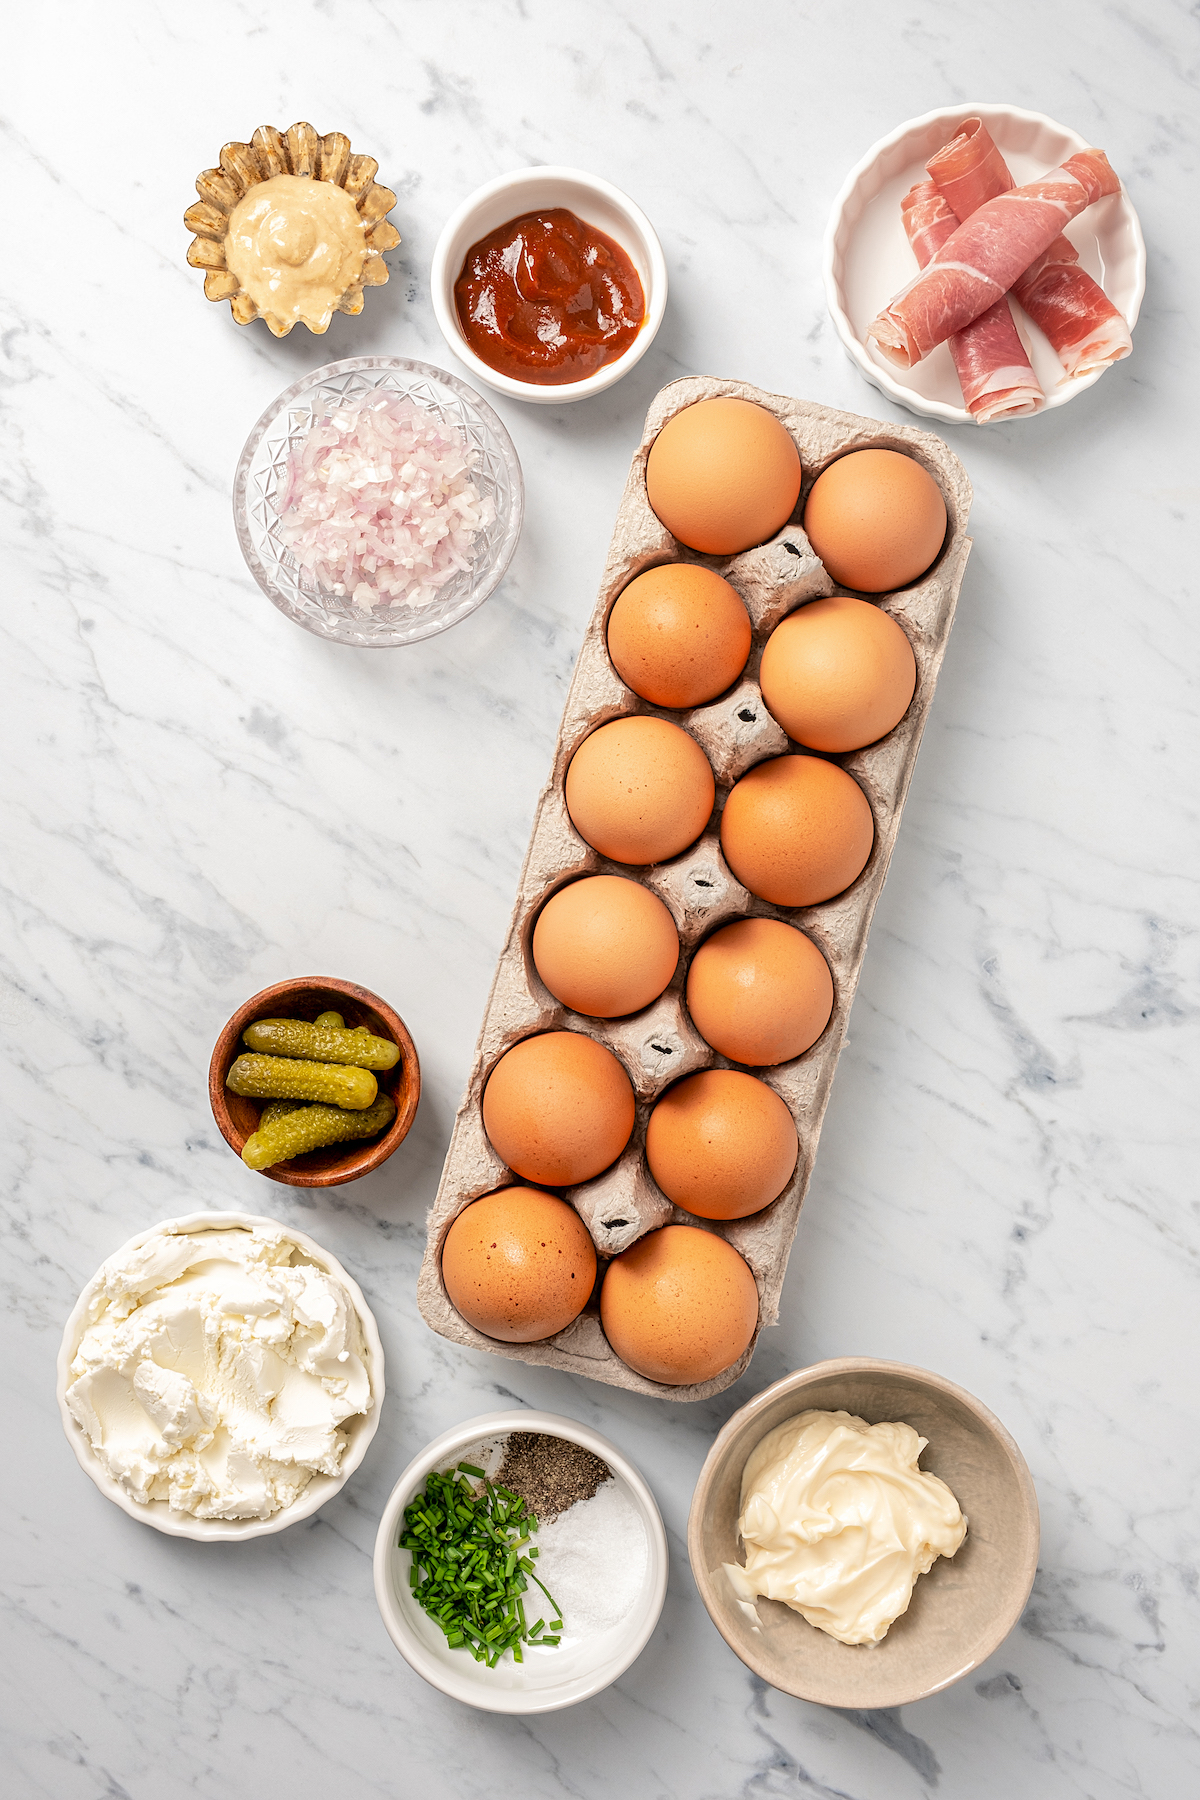 Eggs, sriracha, prosciutto, cornichons, seasonings, mayonnaise, and other ingredients on a work surface.